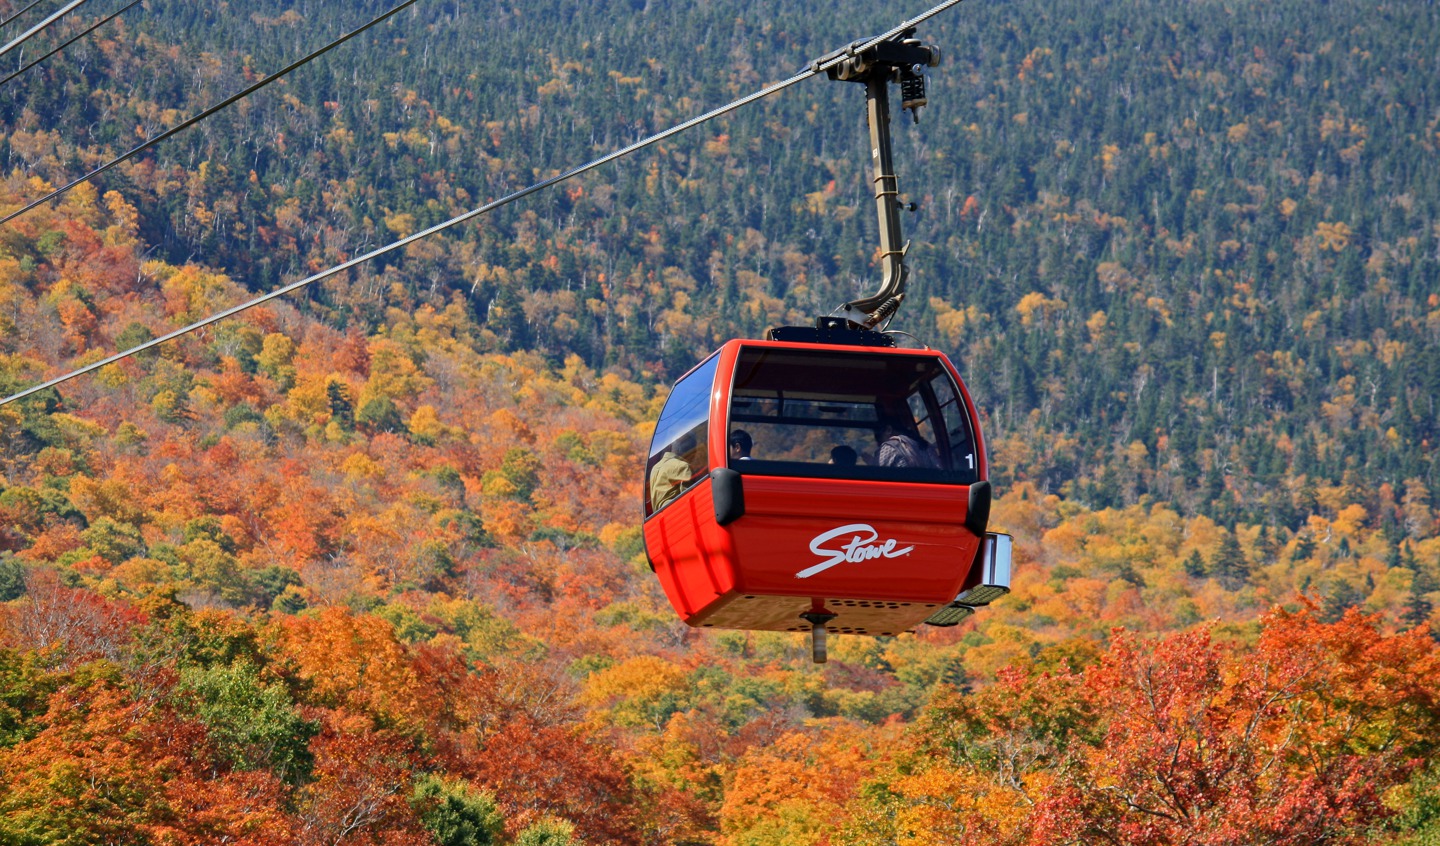  Things to do in Vermont - Stowe Gondola 